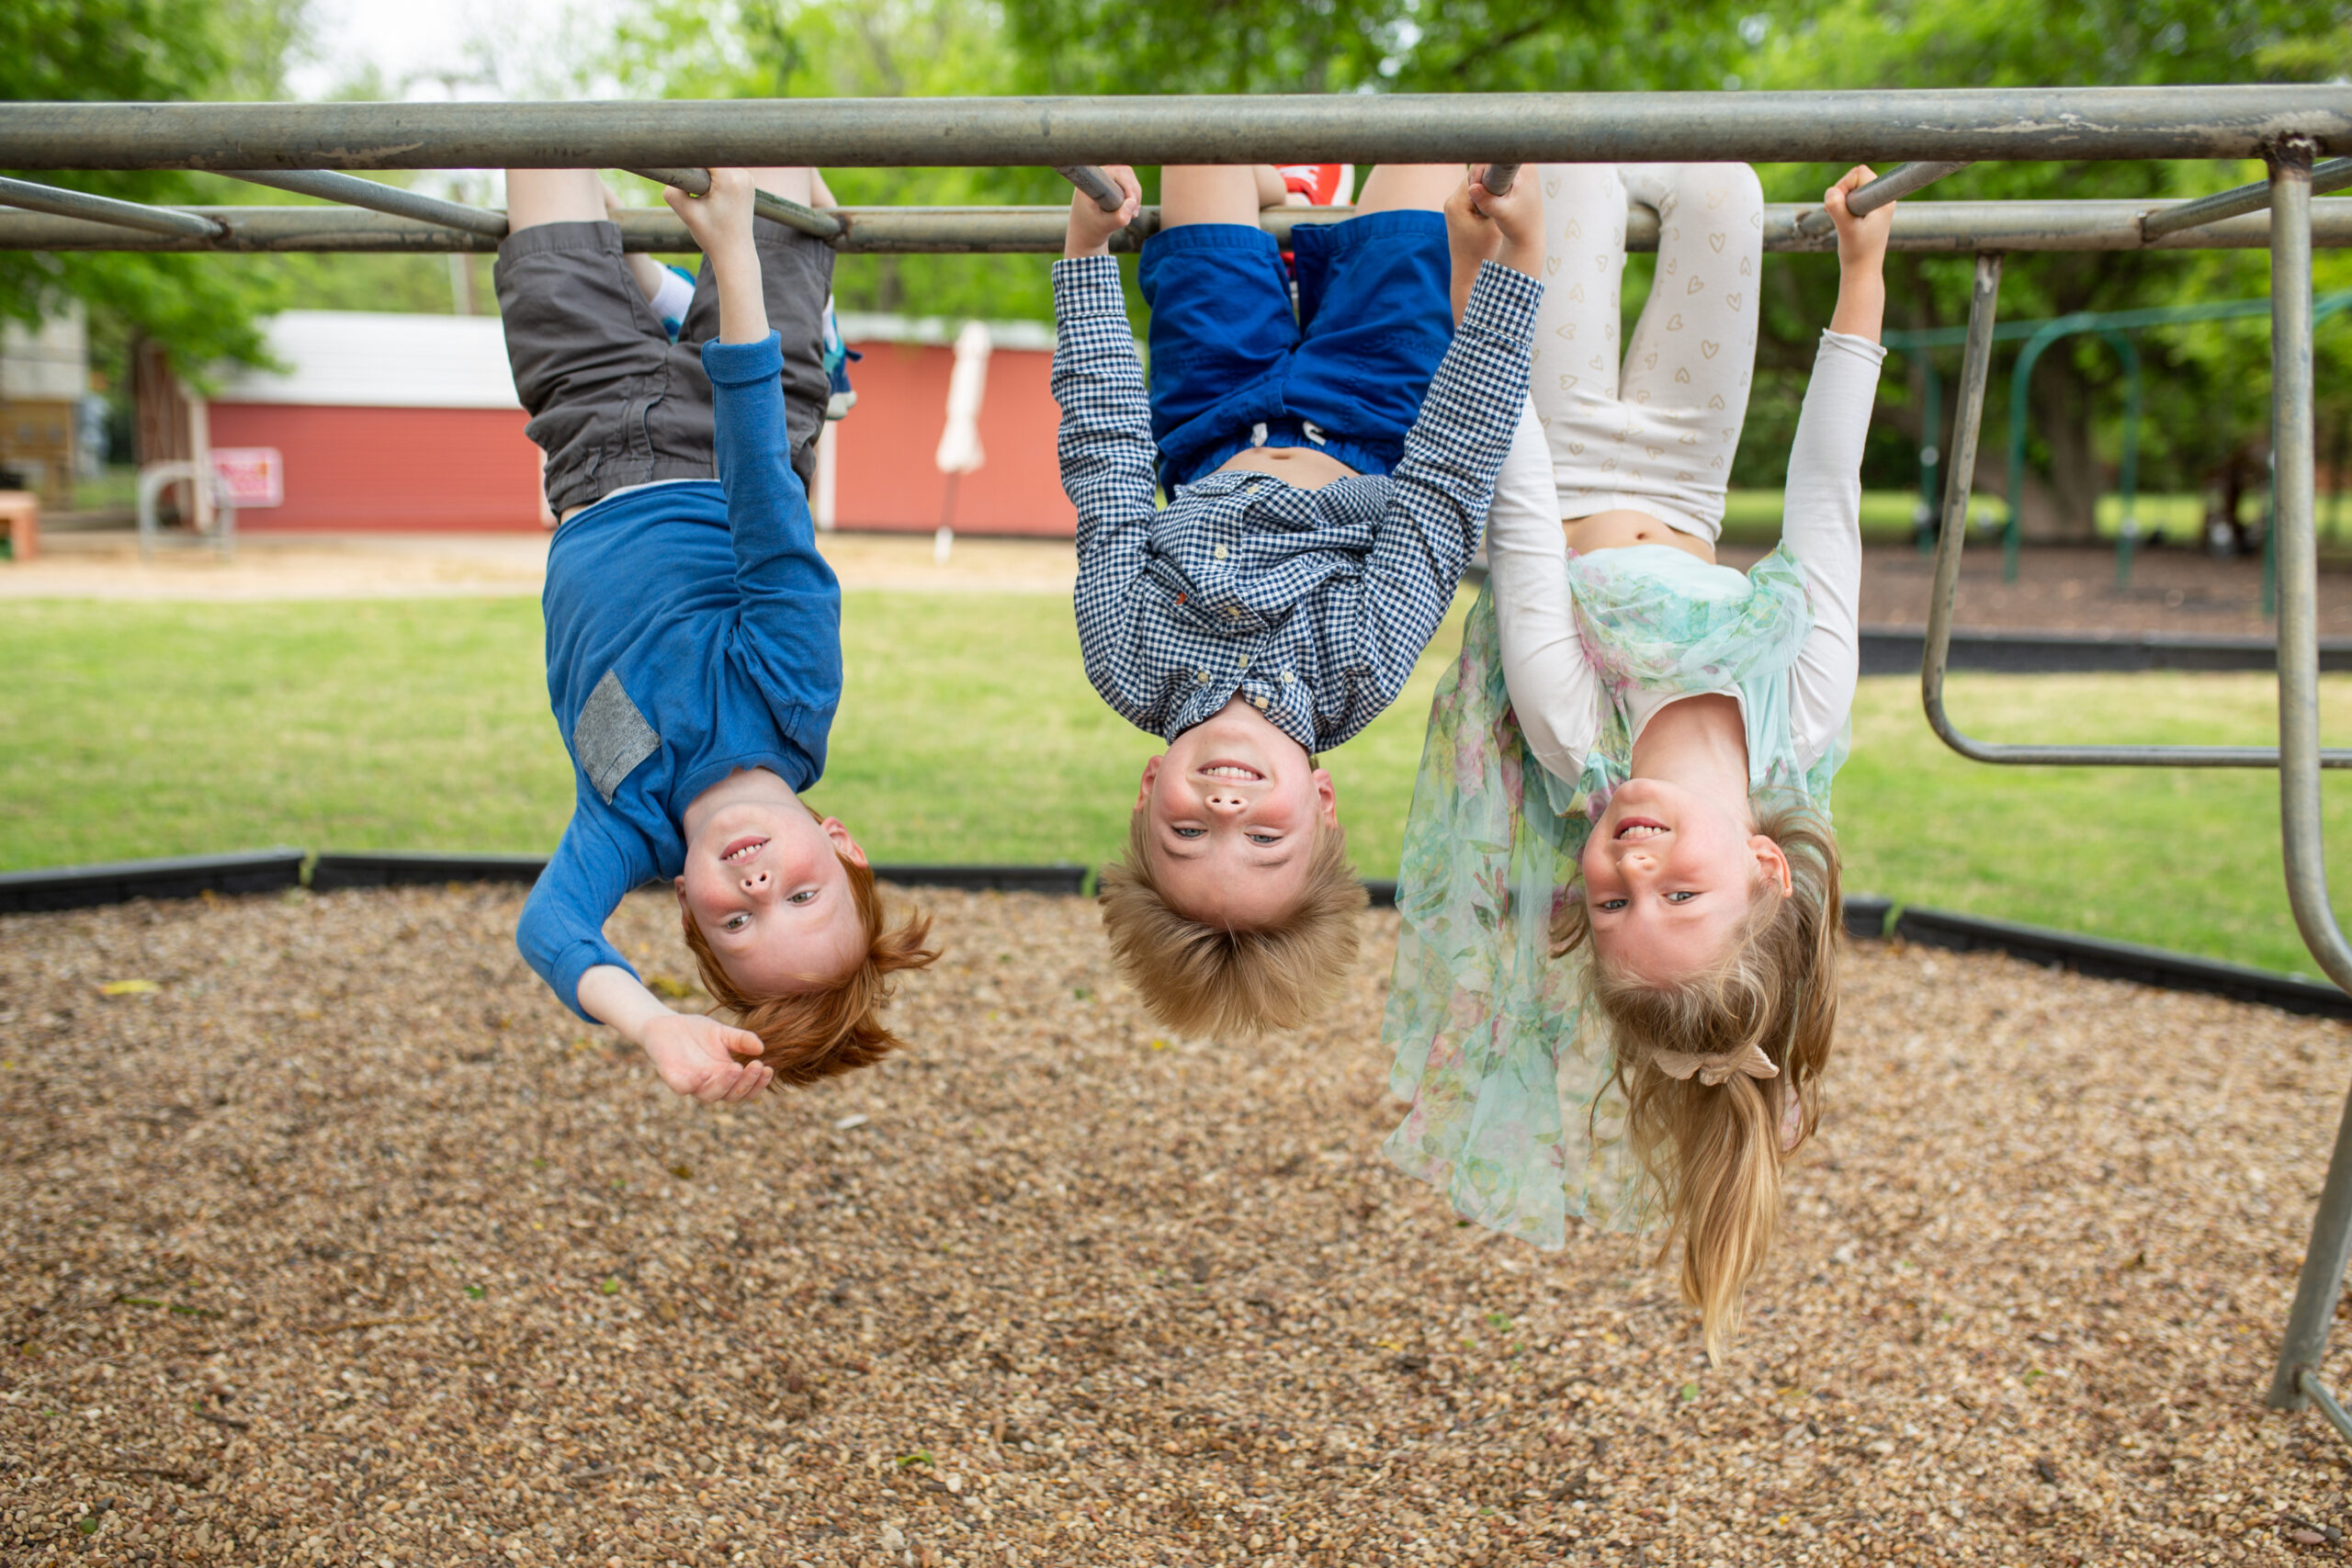 Three children hanging upside down from a bar on the playground at Northaven Co-operative Preschool in Dallas